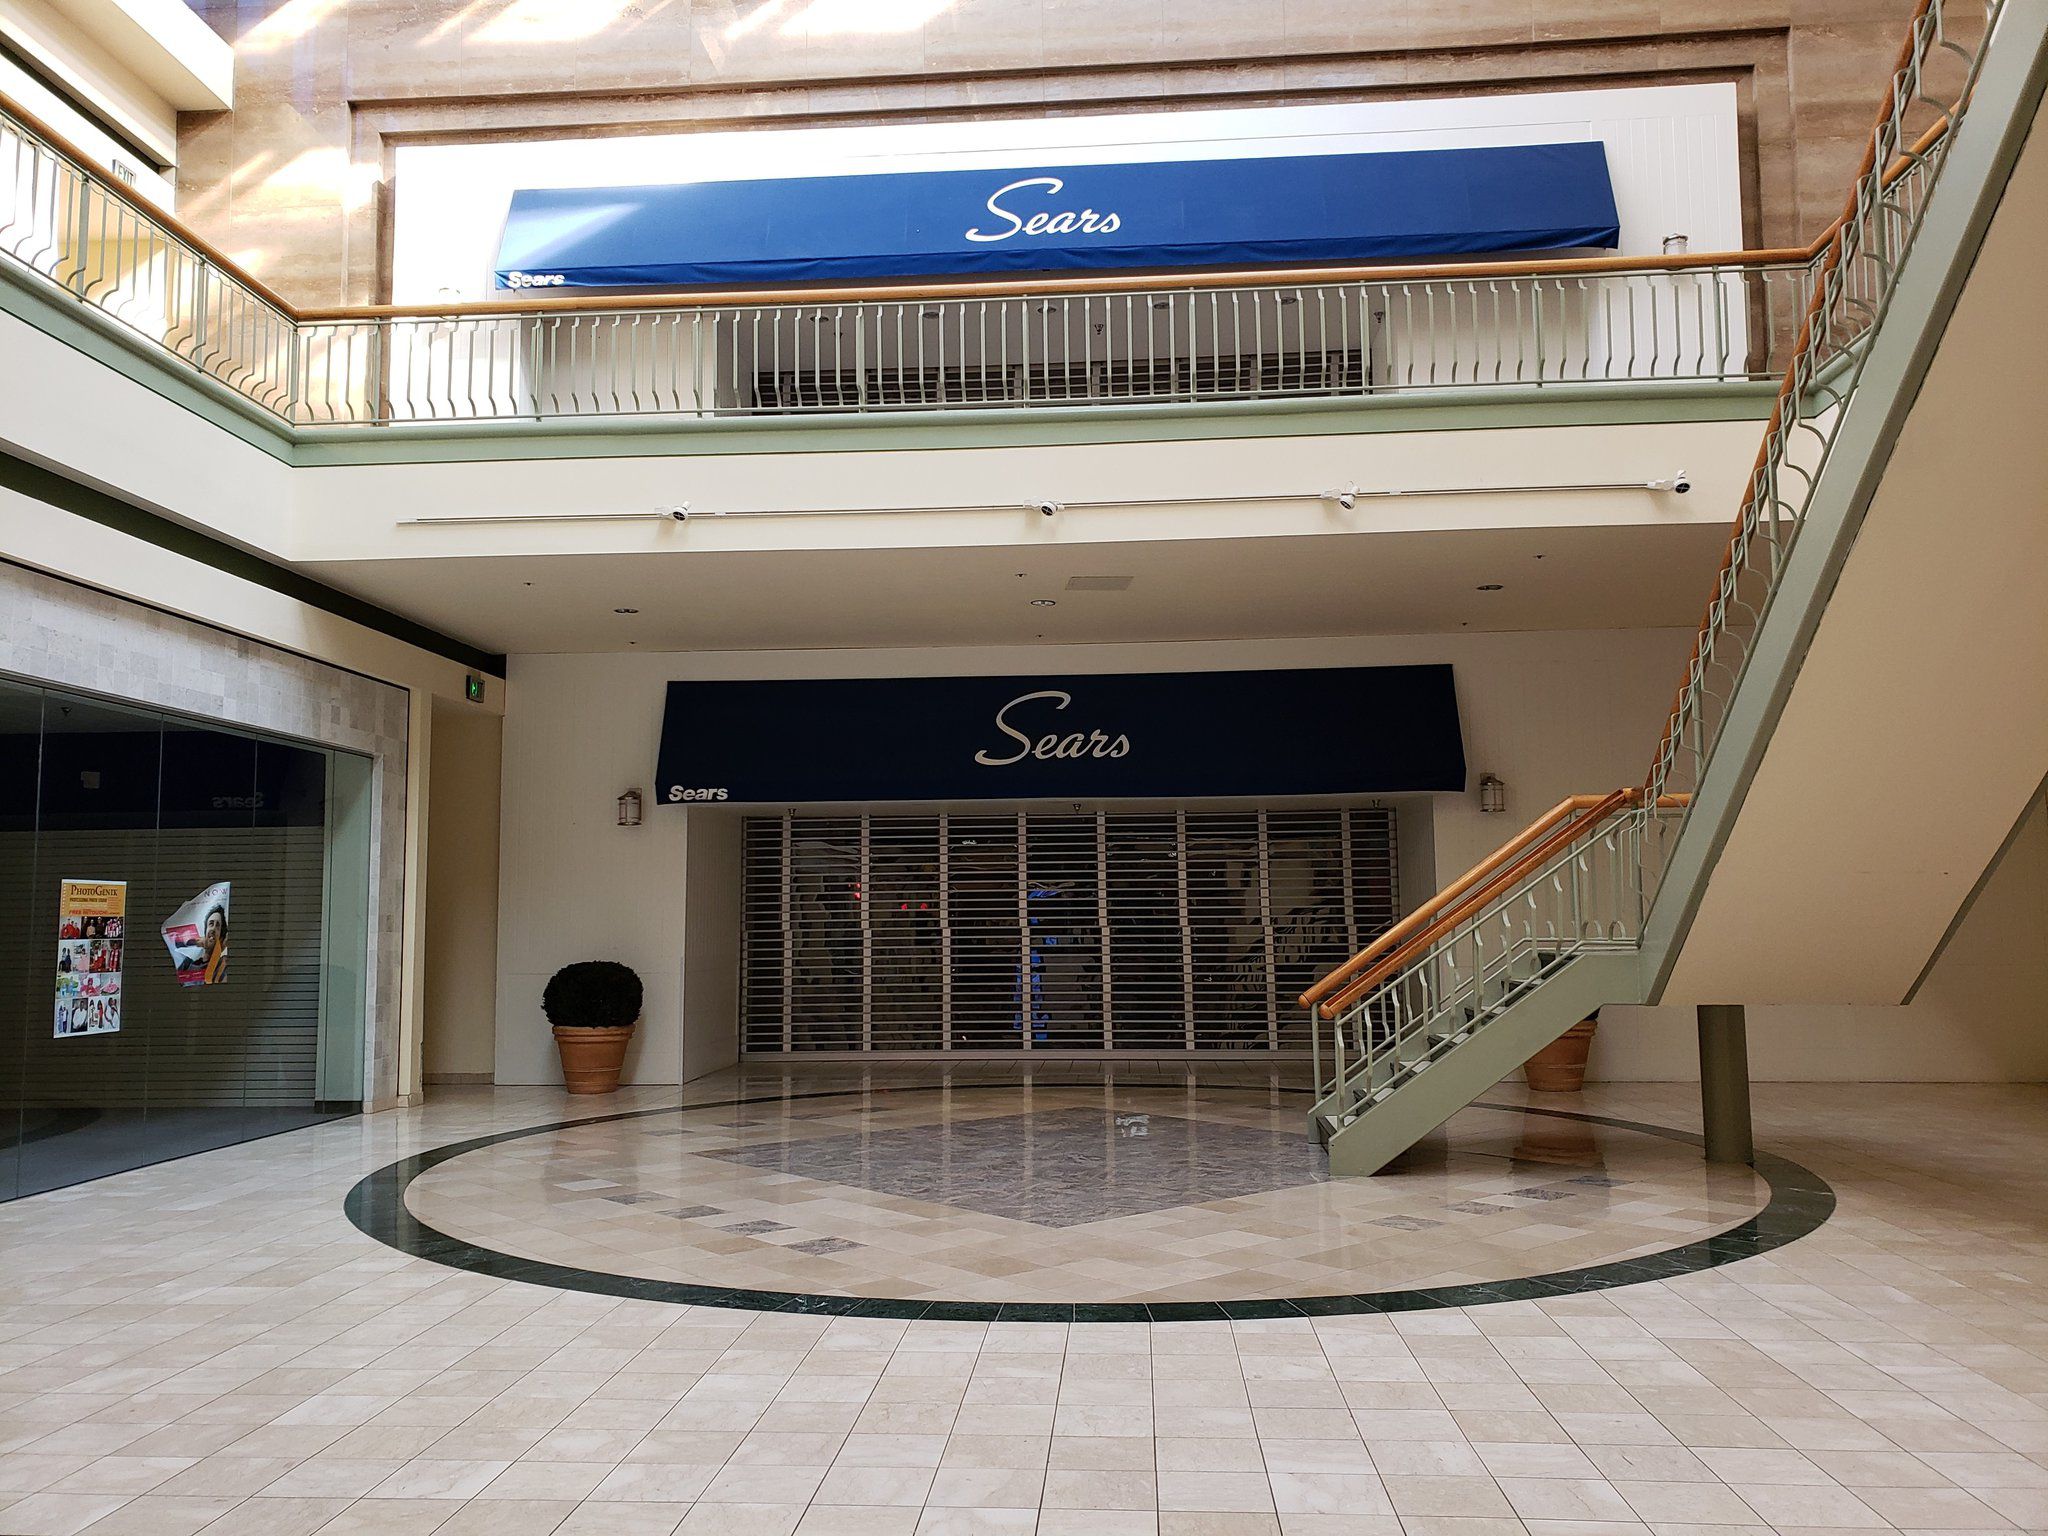 and Mall Operator Look at Turning Sears, J.C. Penney Stores Into  Fulfillment Centers - WSJ